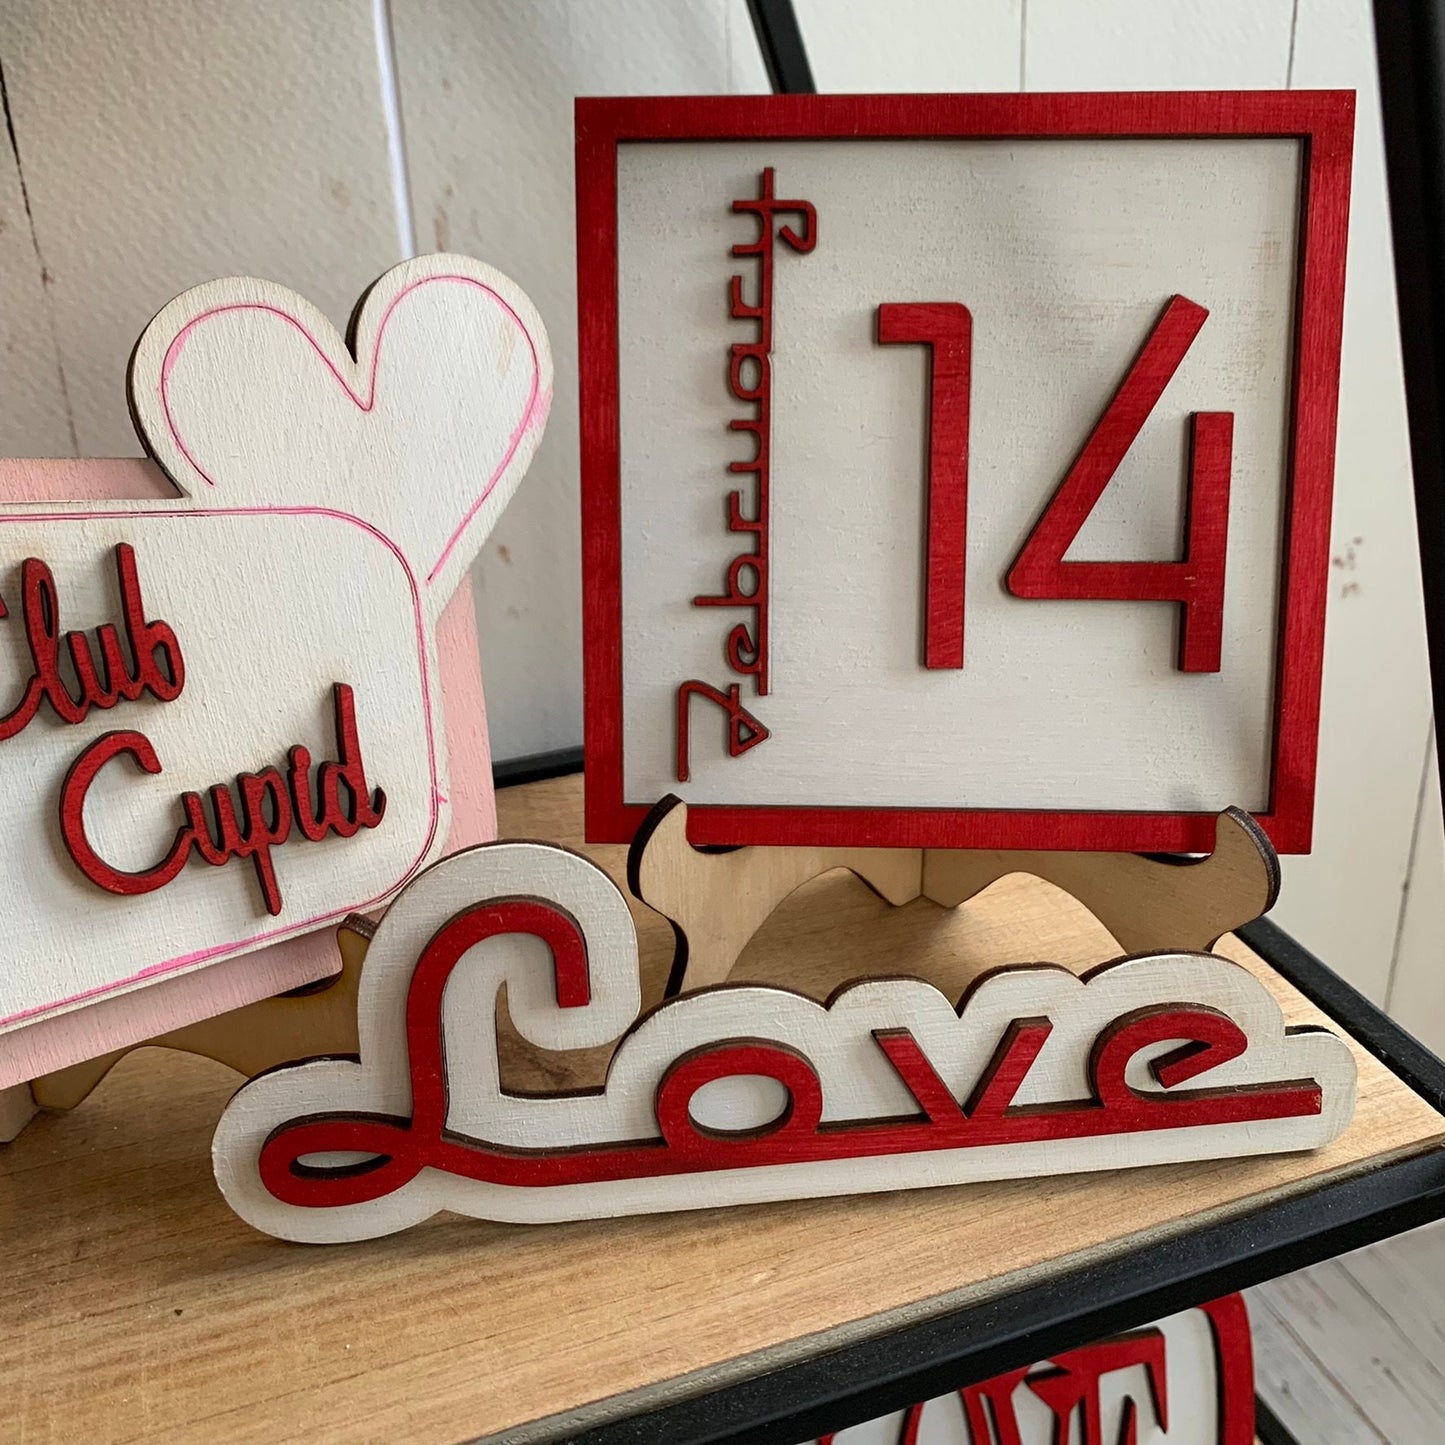 Retro Valentine's Day Tiered Tray Decor - Laser Cut Wood Painted, Mid Century Modern, Vintage Style Decorations